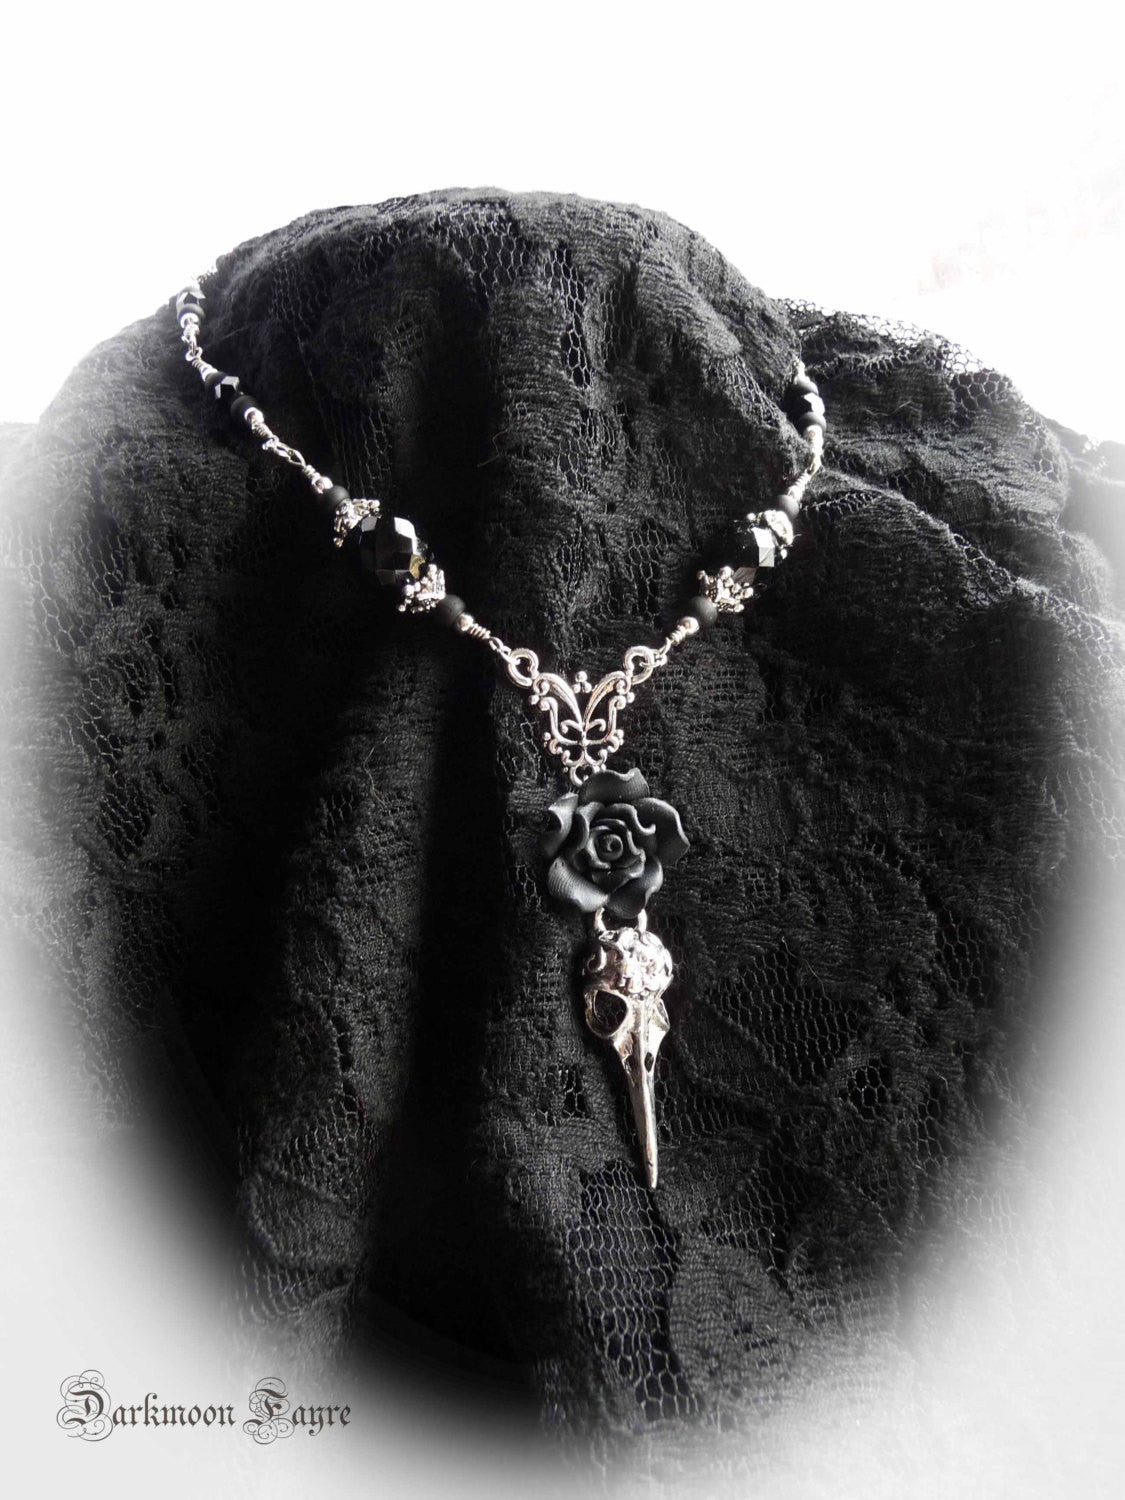 ***Black Rose & Tattooed Silver Bird Skull Rosary Necklace/ Choker. Jet Black Faceted Vintage, Fire Polished and Matte Black Glass Beads - Darkmoon Fayre